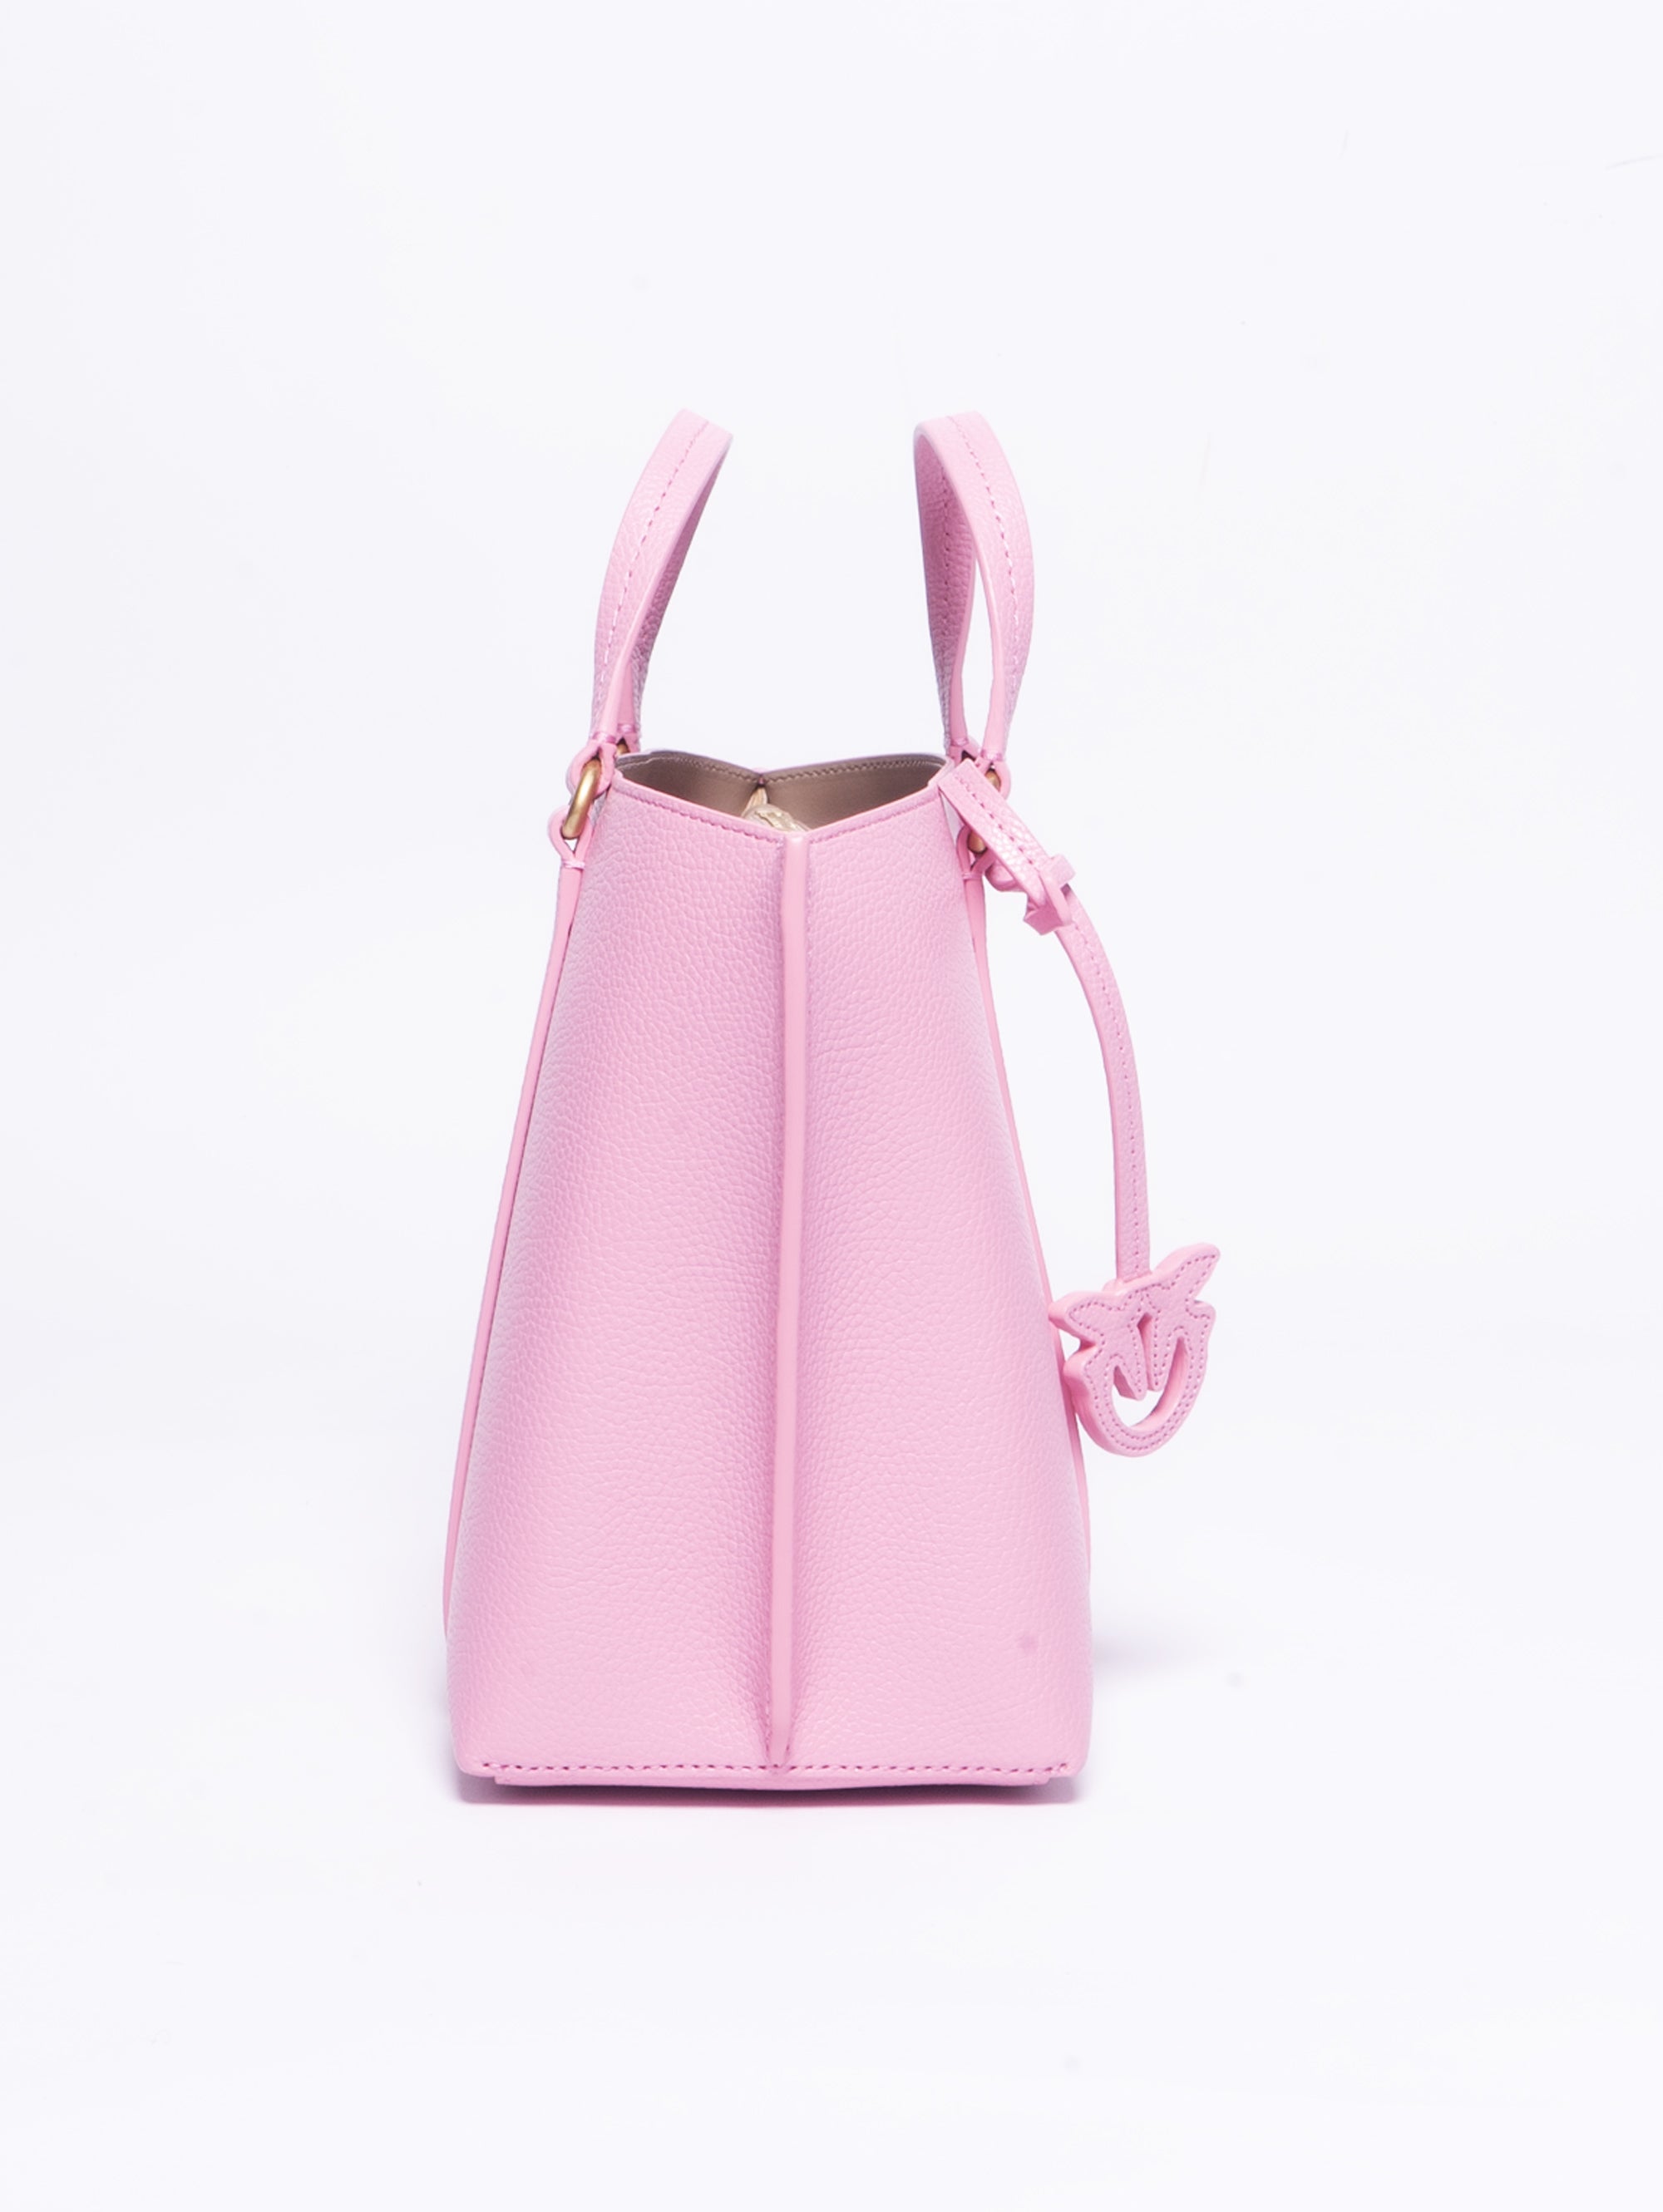 Pink Tumbled Leather Shopper